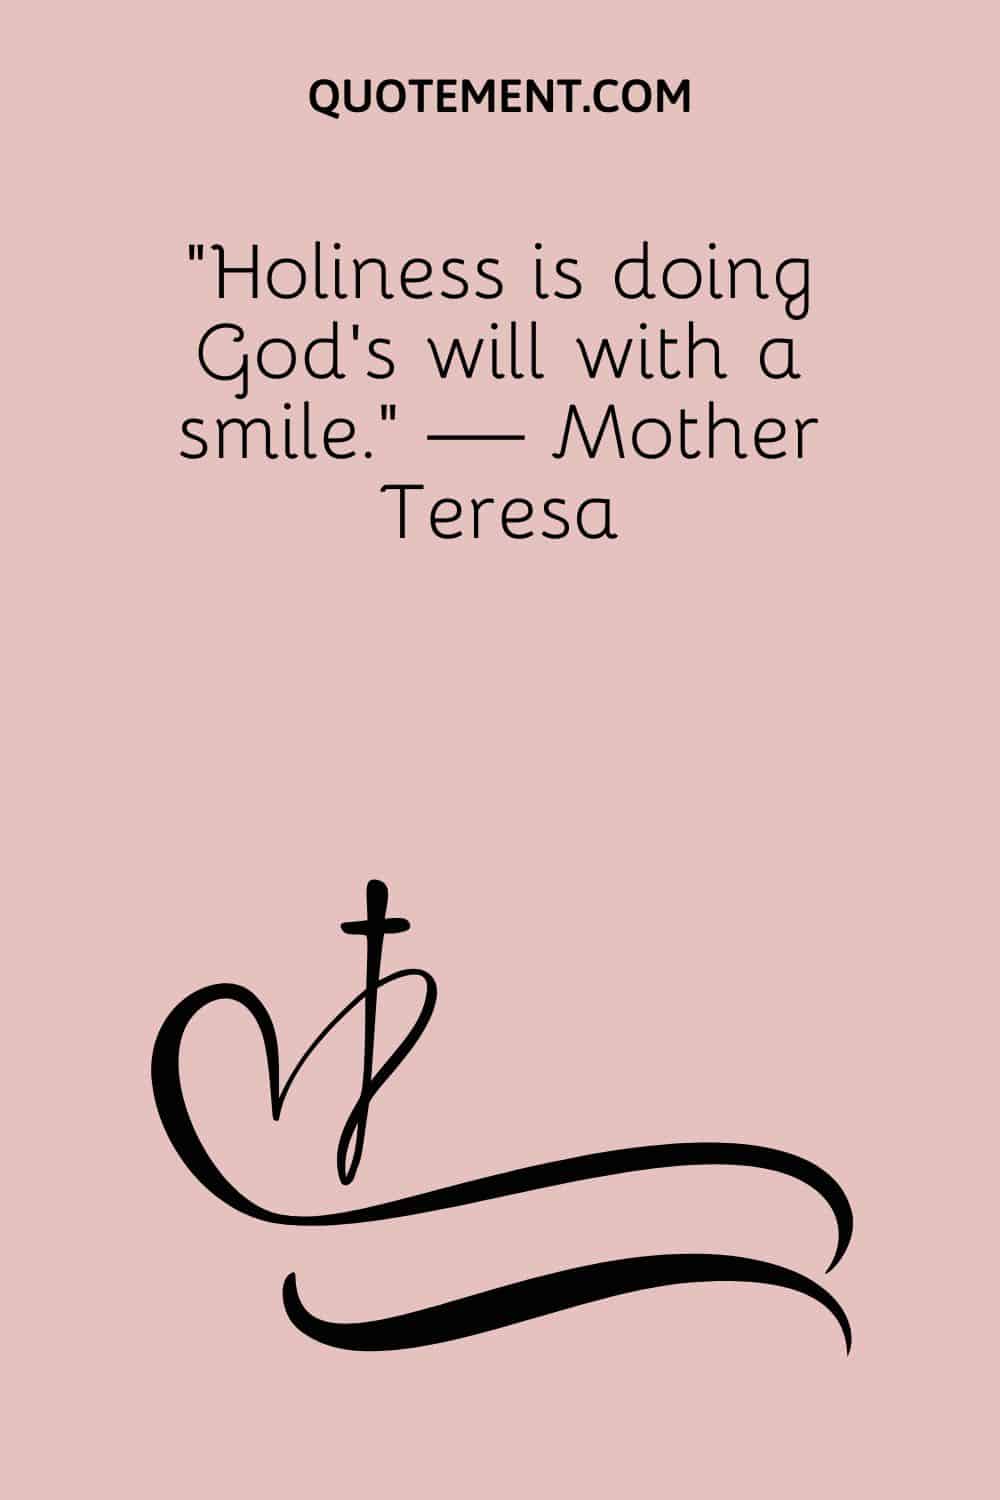 Holiness is doing God’s will with a smile